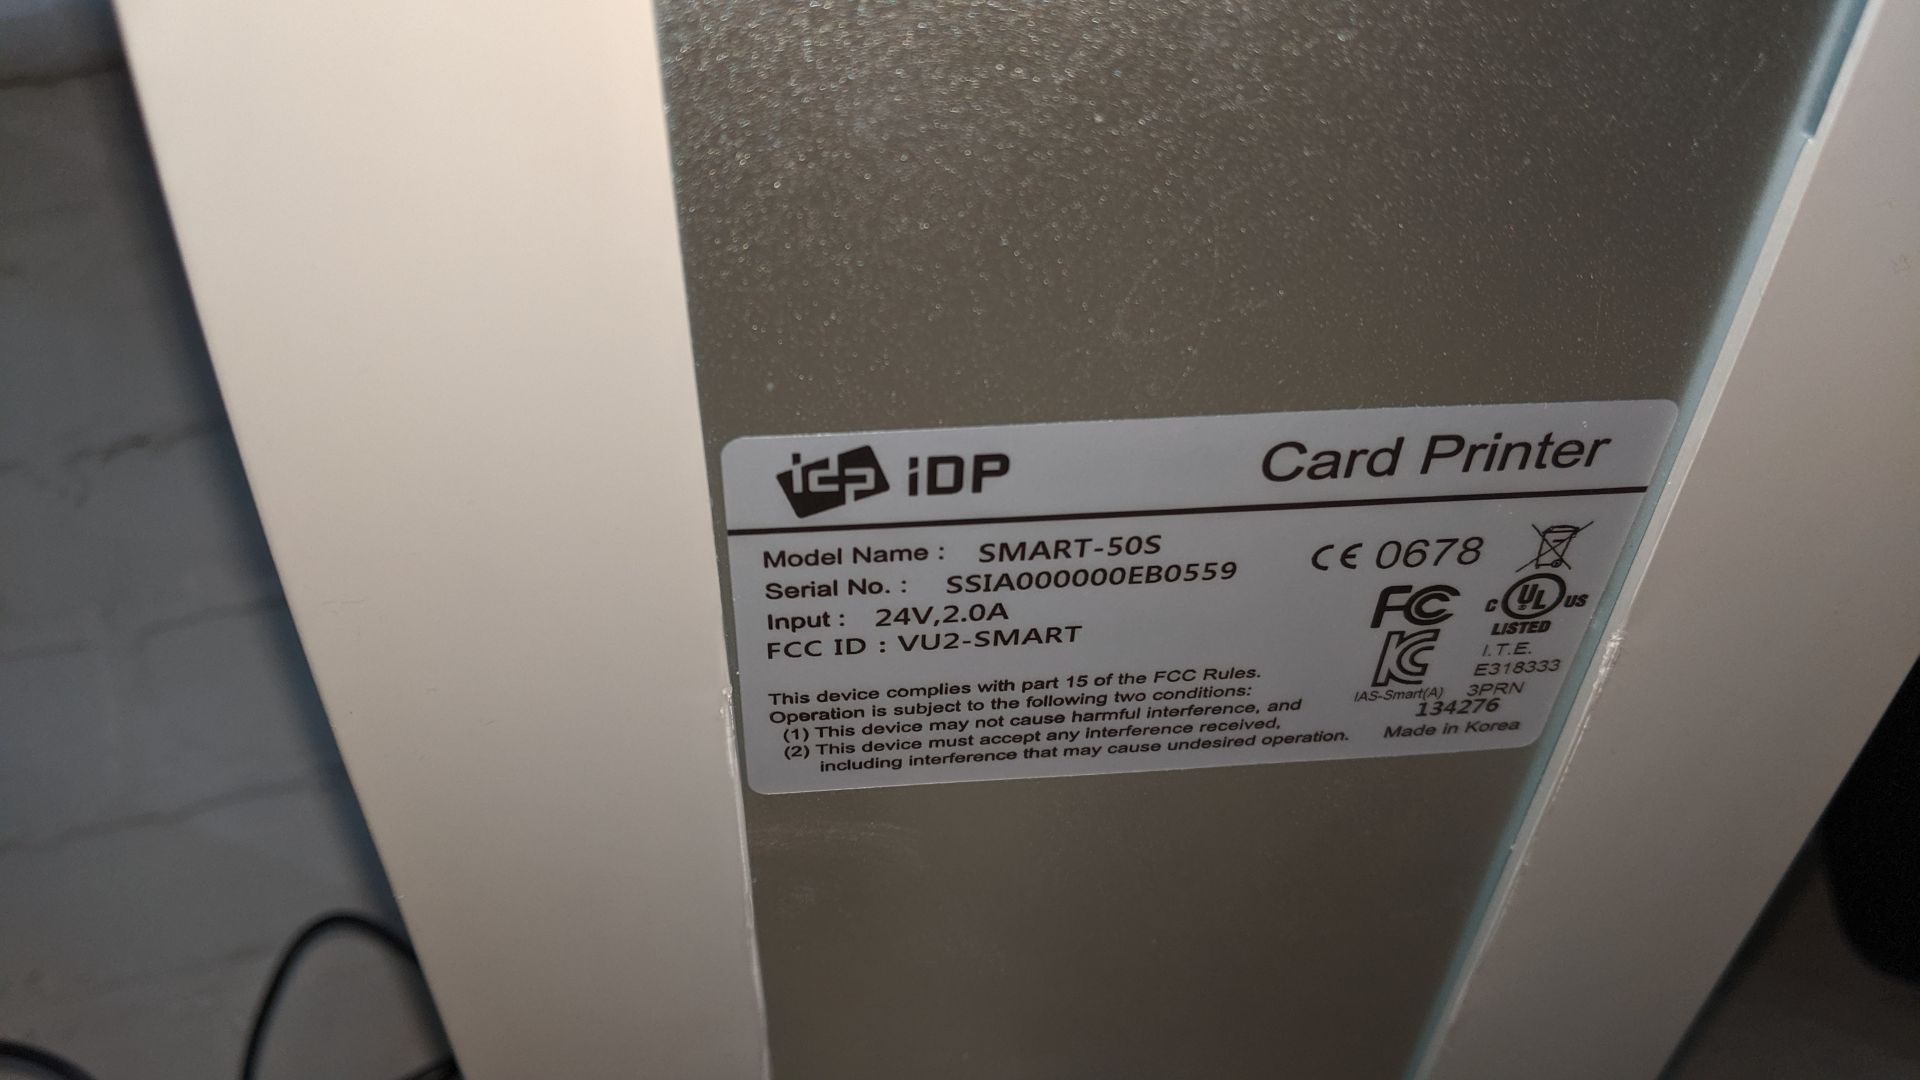 IDP Smart-50S card printer. Lots 560 - 580 form the total assets of a healthcare recruitment company - Image 5 of 9